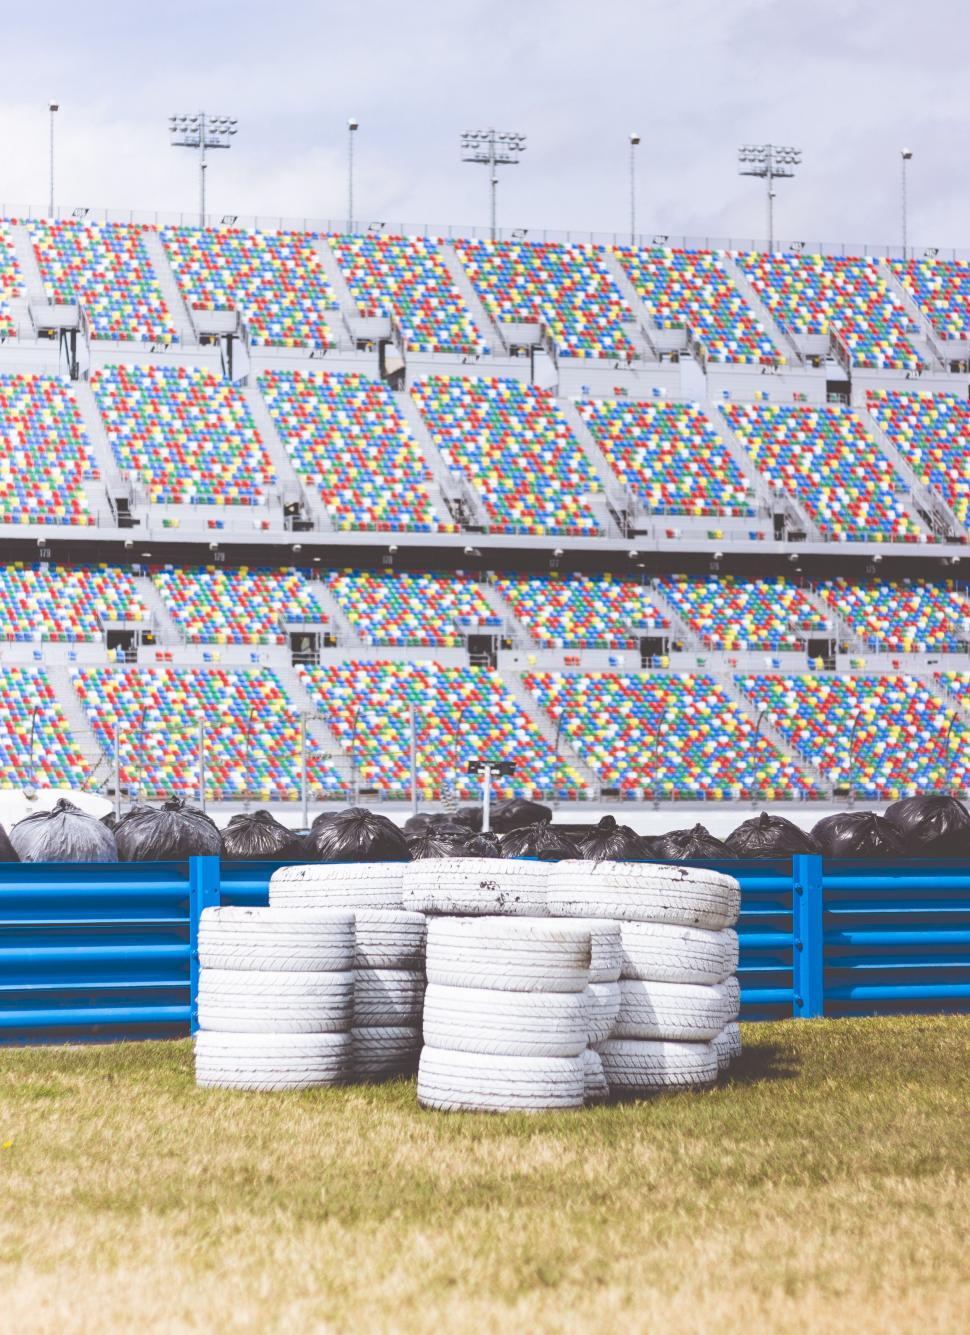 Free Image of White Tires in Front of Blue Fence 